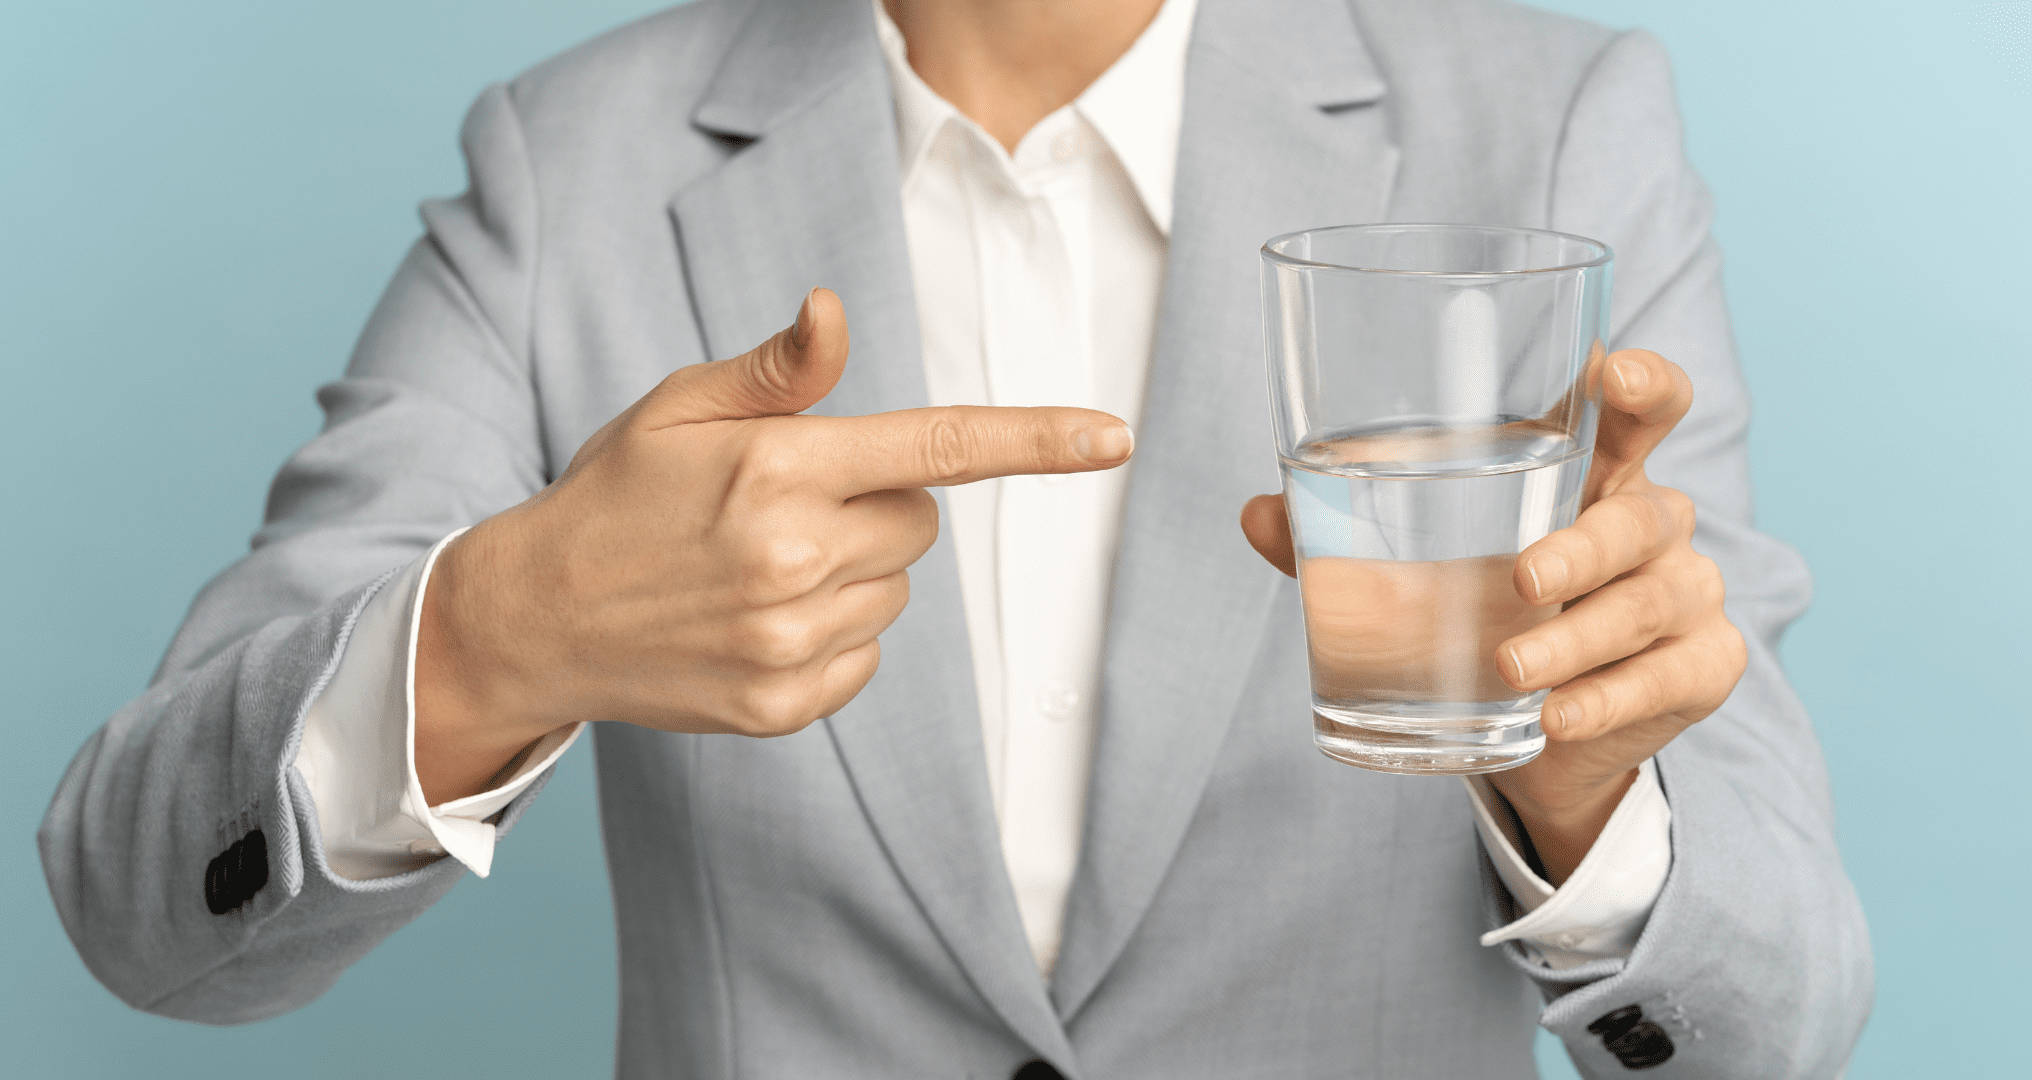 woman holding and pointing to a glass of water